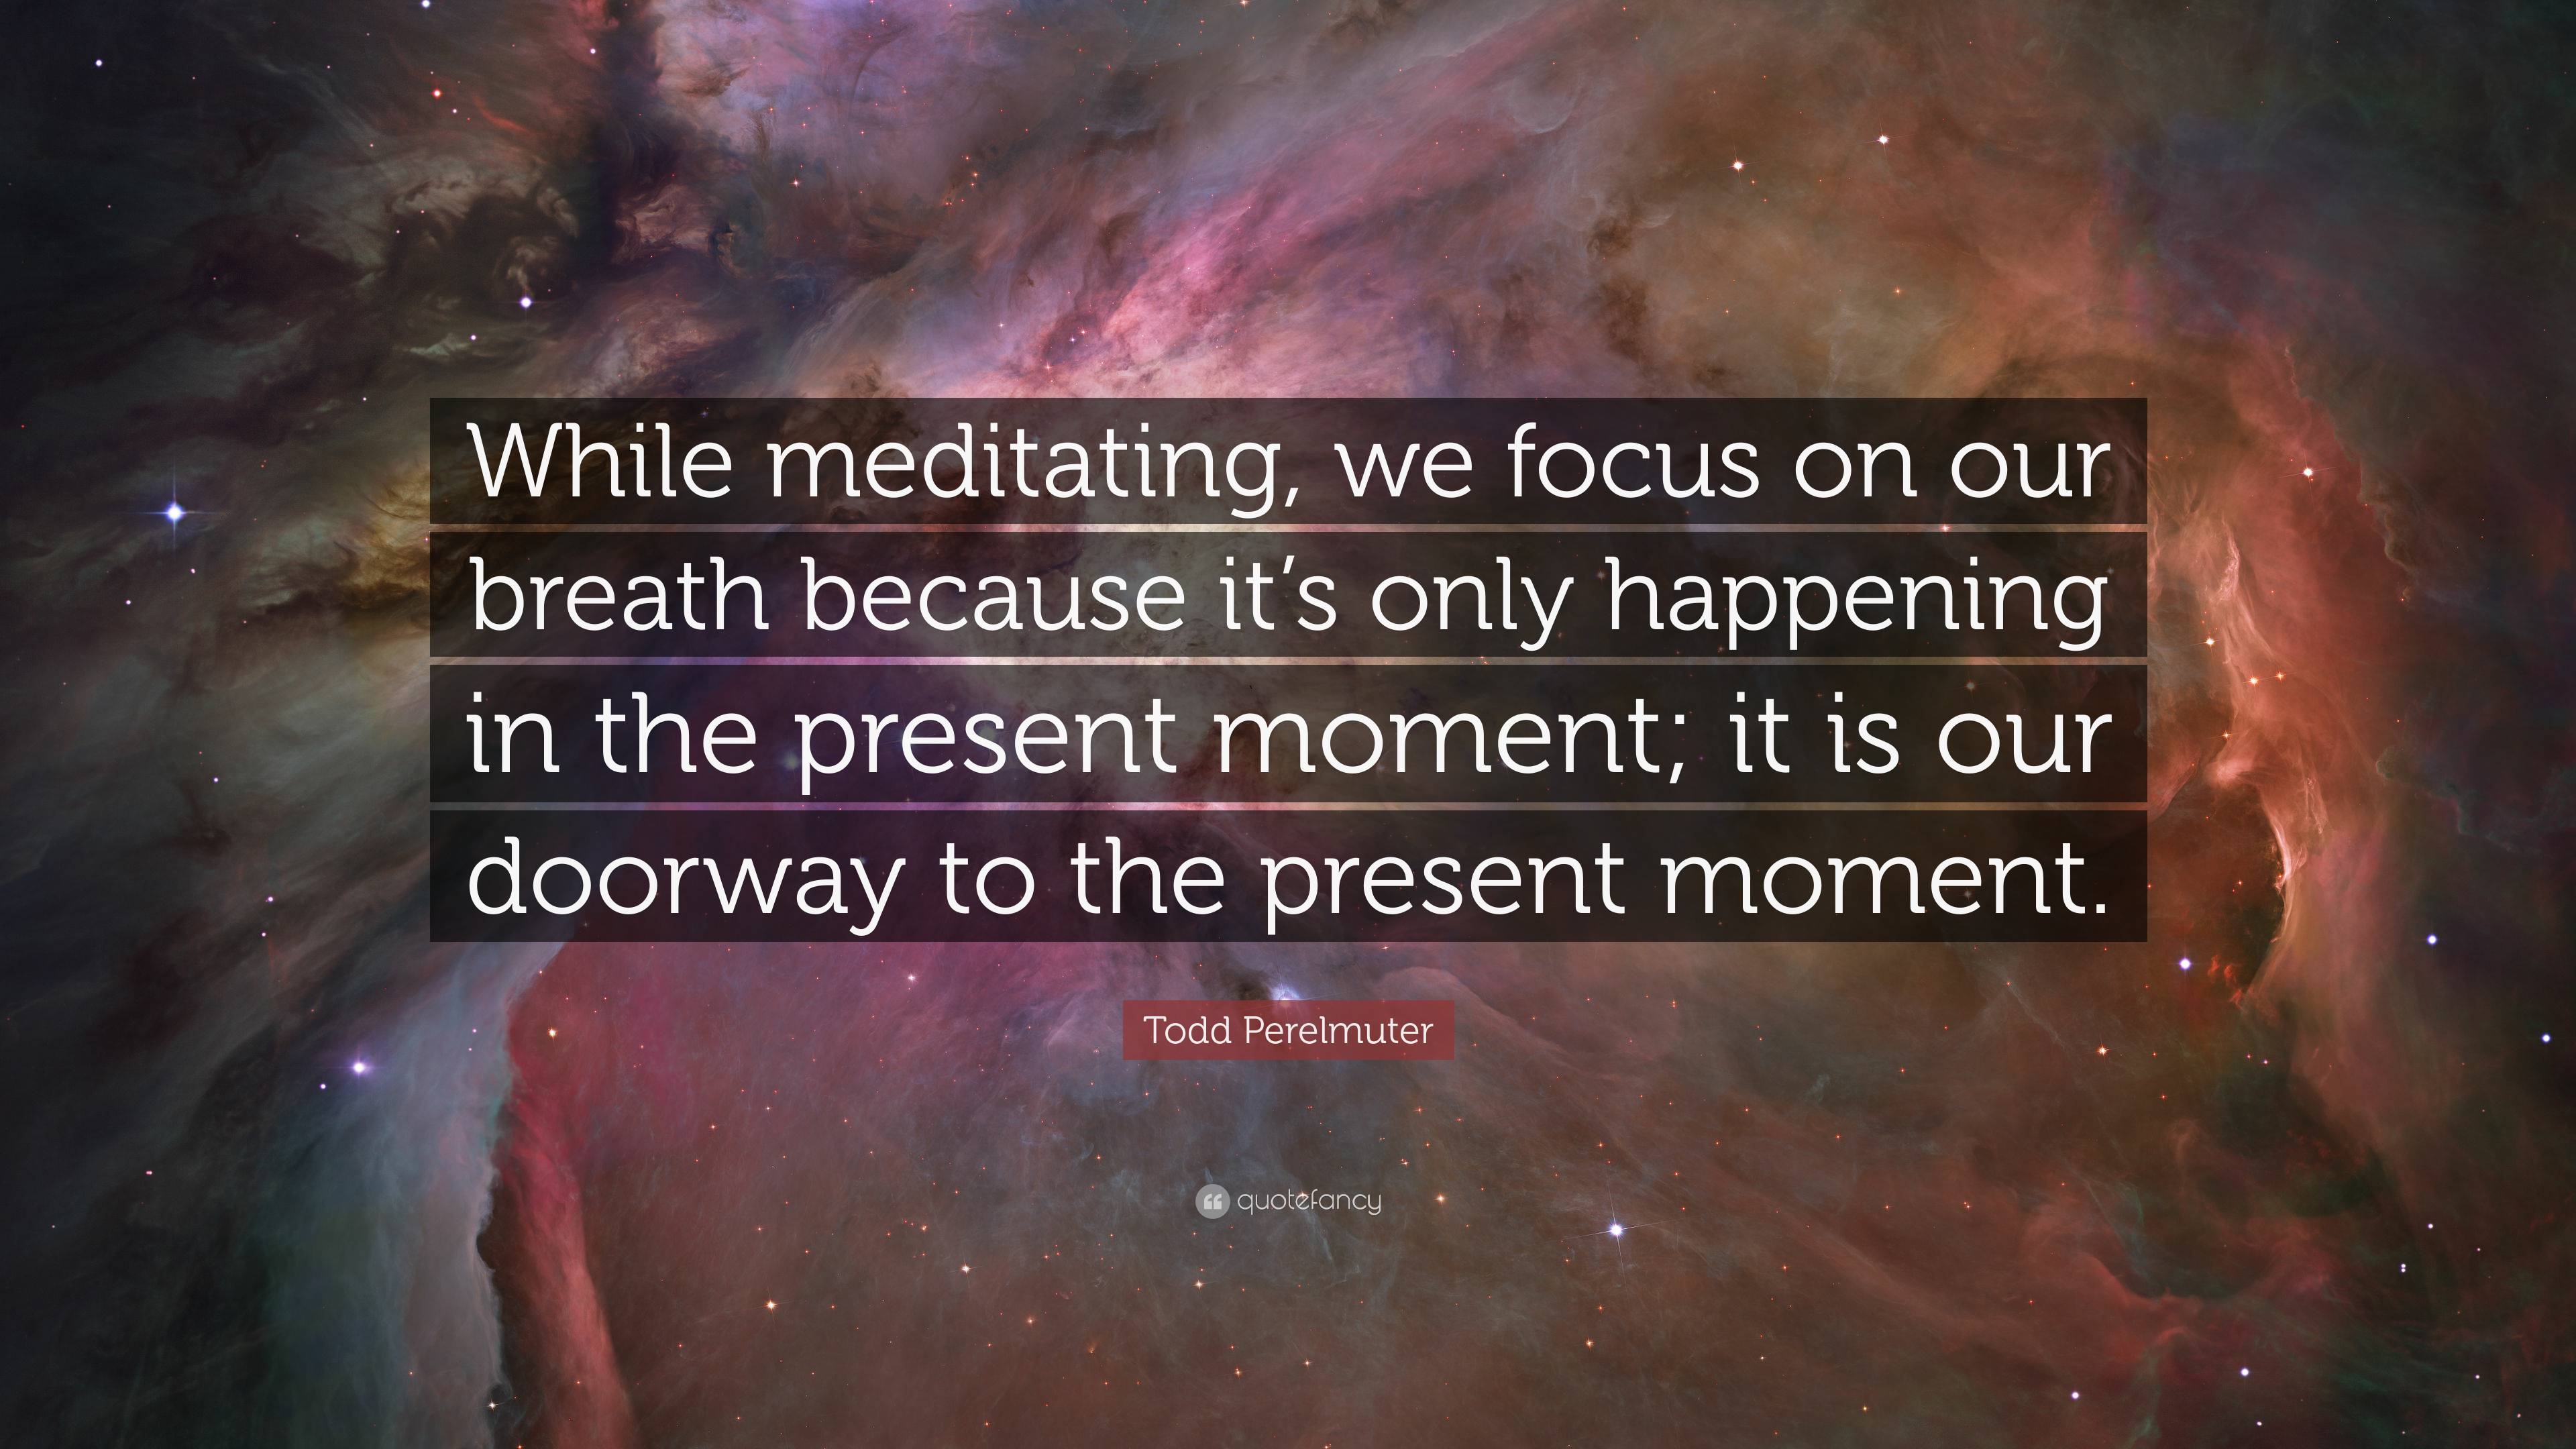 Todd Perelmuter Quote: “While meditating, we focus on our breath ...